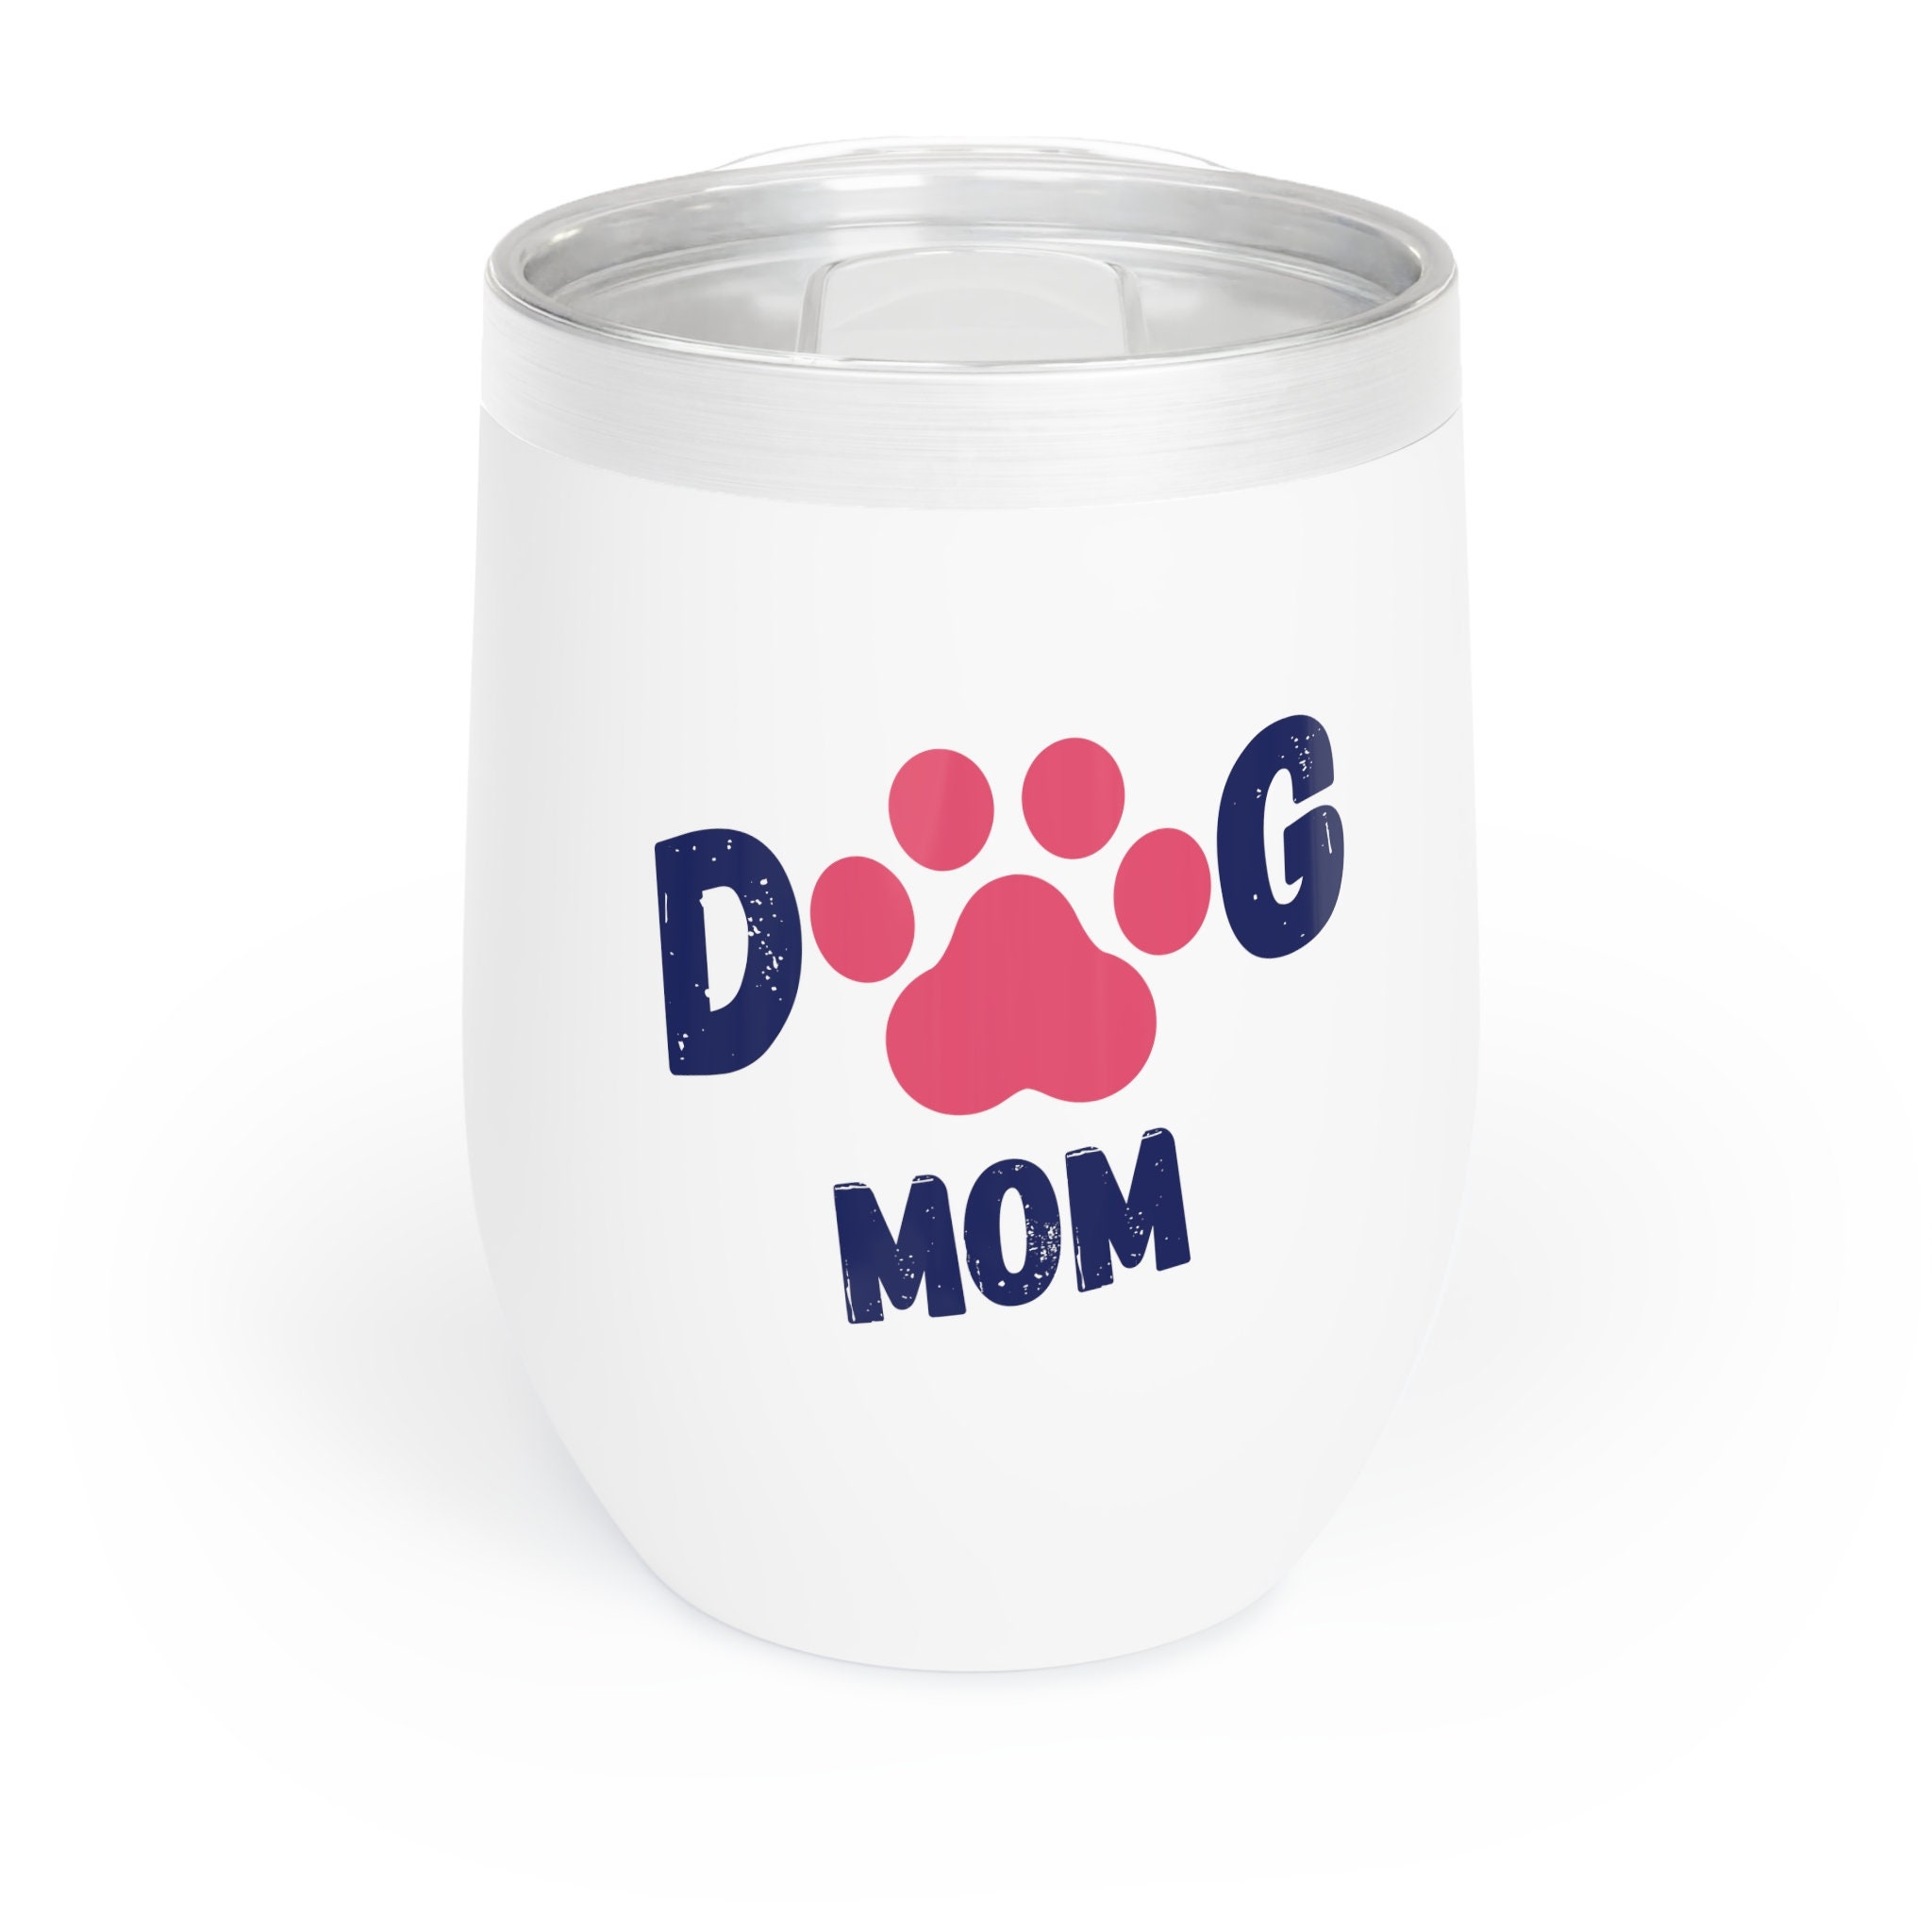 Discover Dog Mom Tumbler, Mother's Day Gift, Gift For Mom